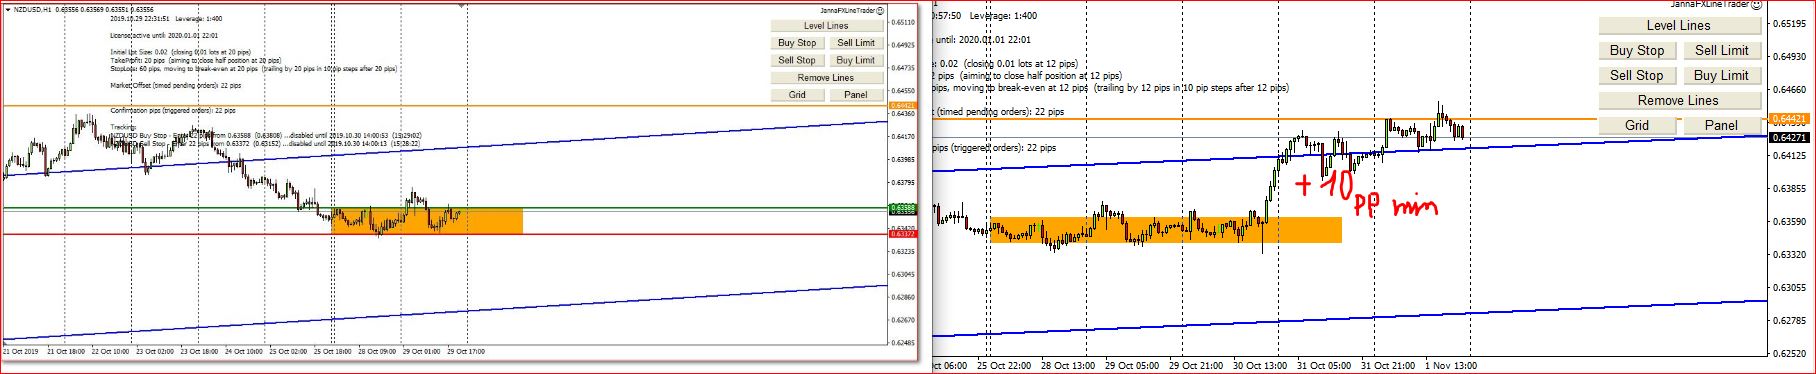 How My Forex Technical Analysis Works, Results 1